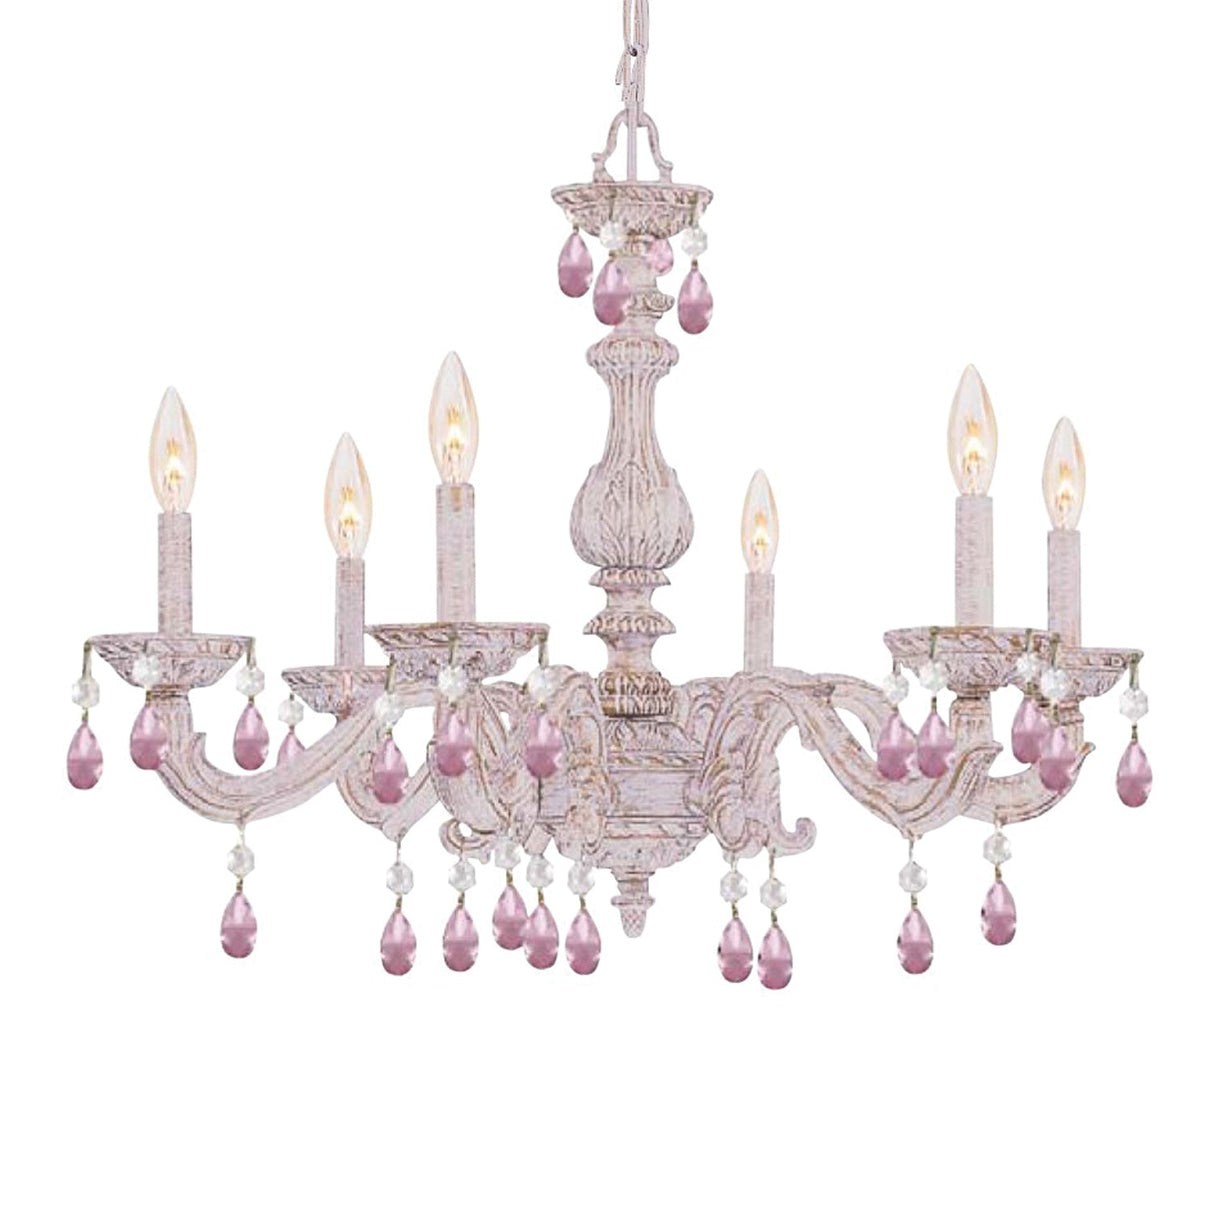 Paris Market 6 Light Clear Crystal Antique White Chandelier 5036-AW-CL-MWP